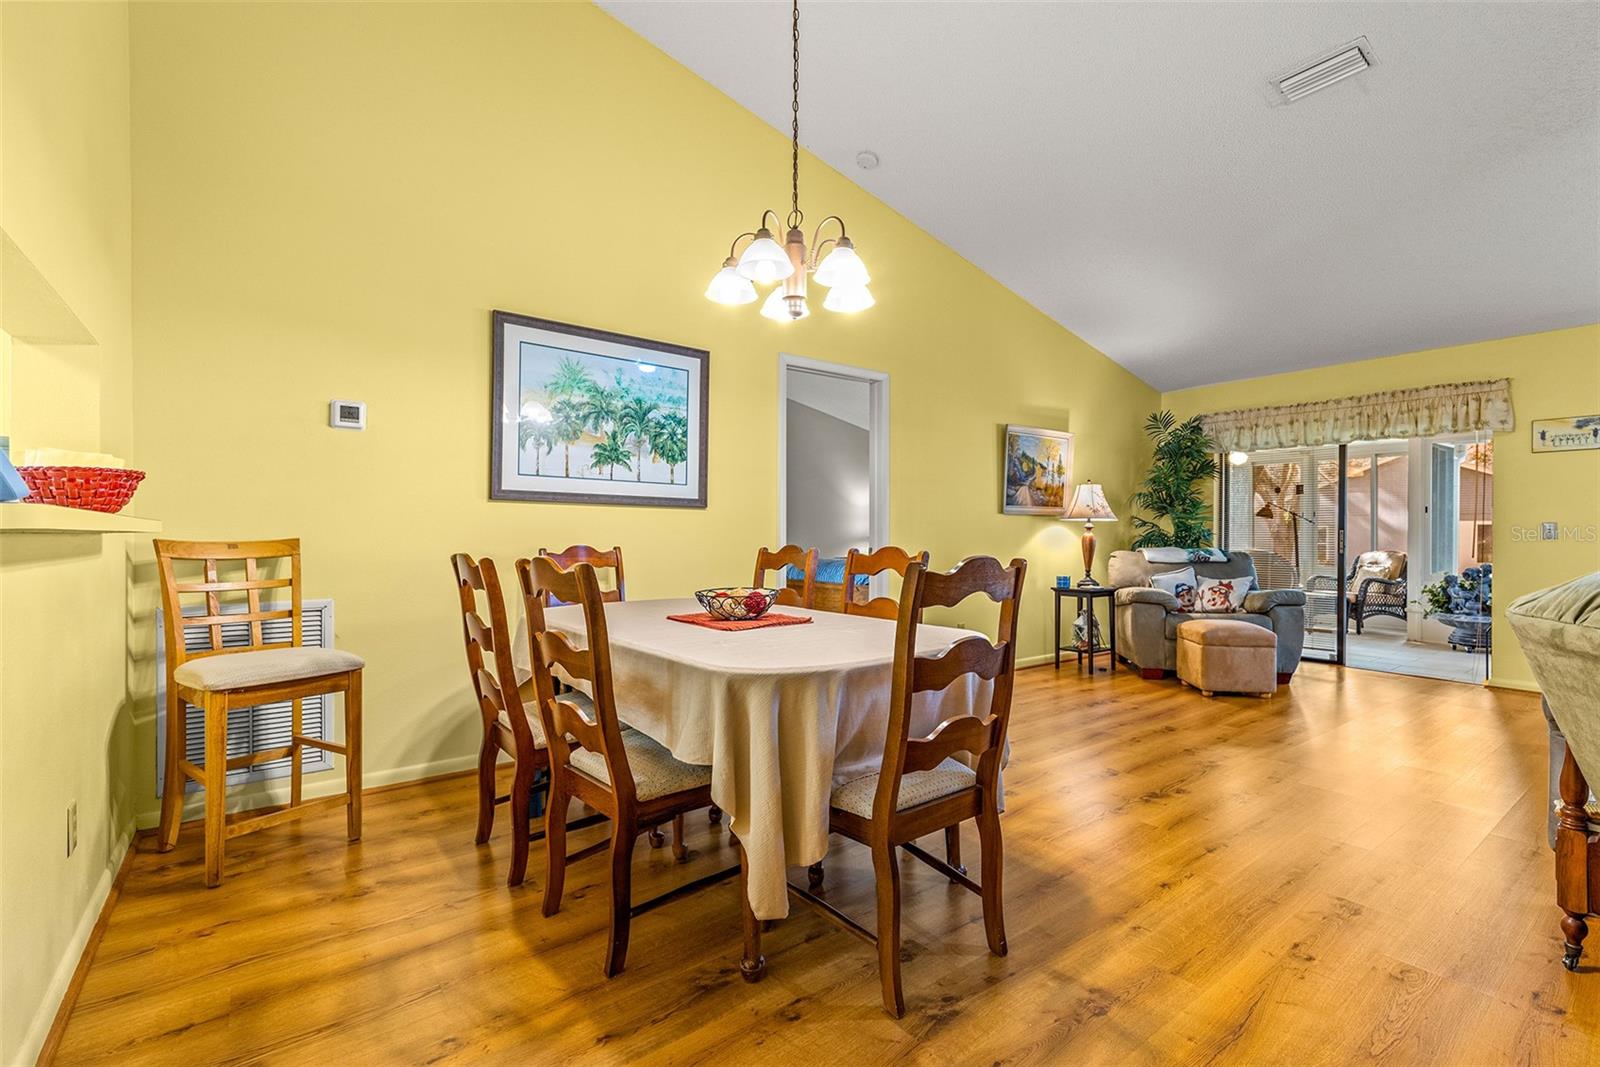 Large dining area which is perfect for those large family gatherings!